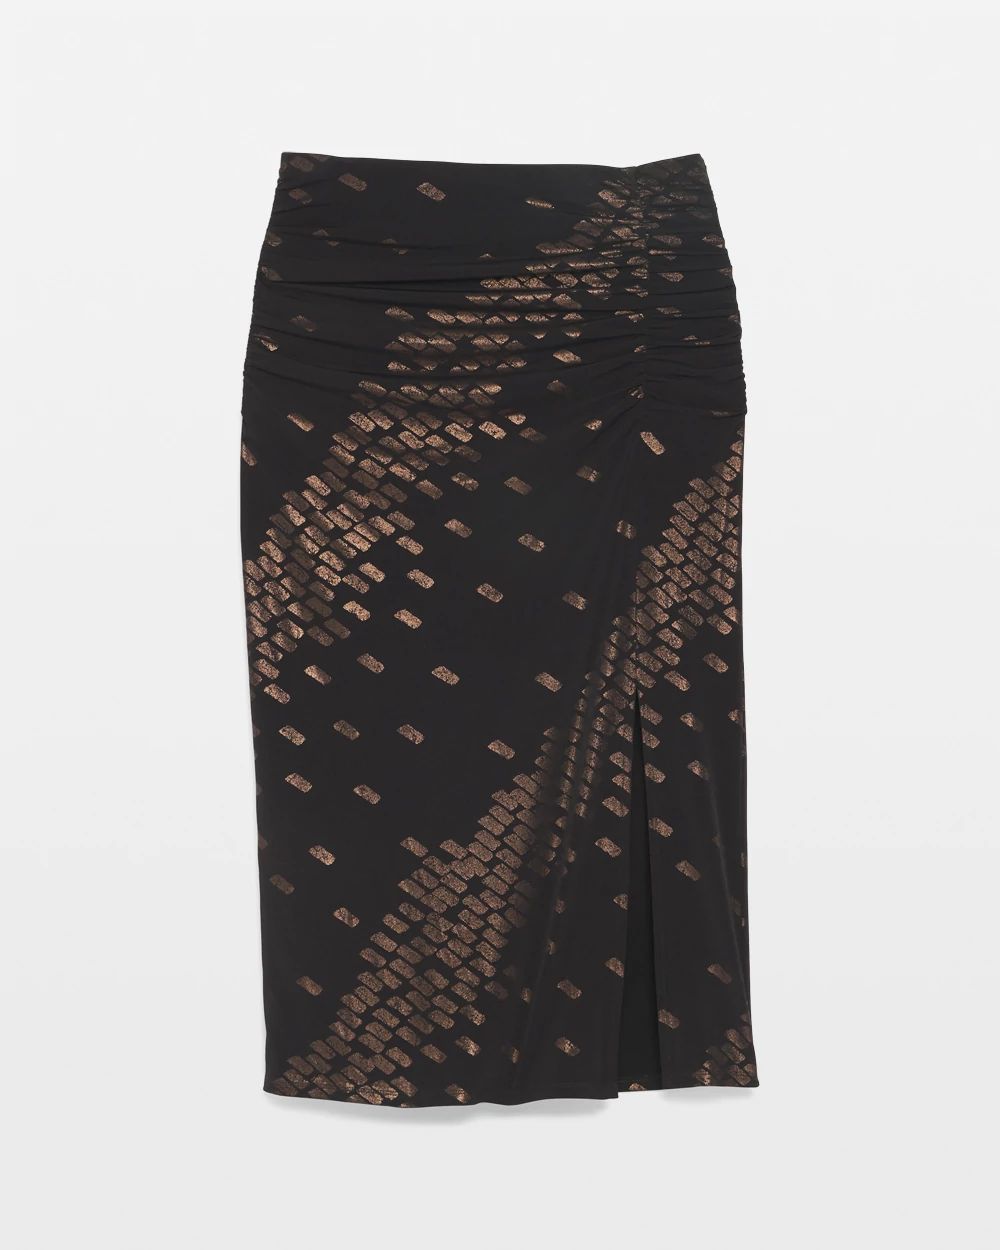 Ruched Seamed Midi Skirt click to view larger image.